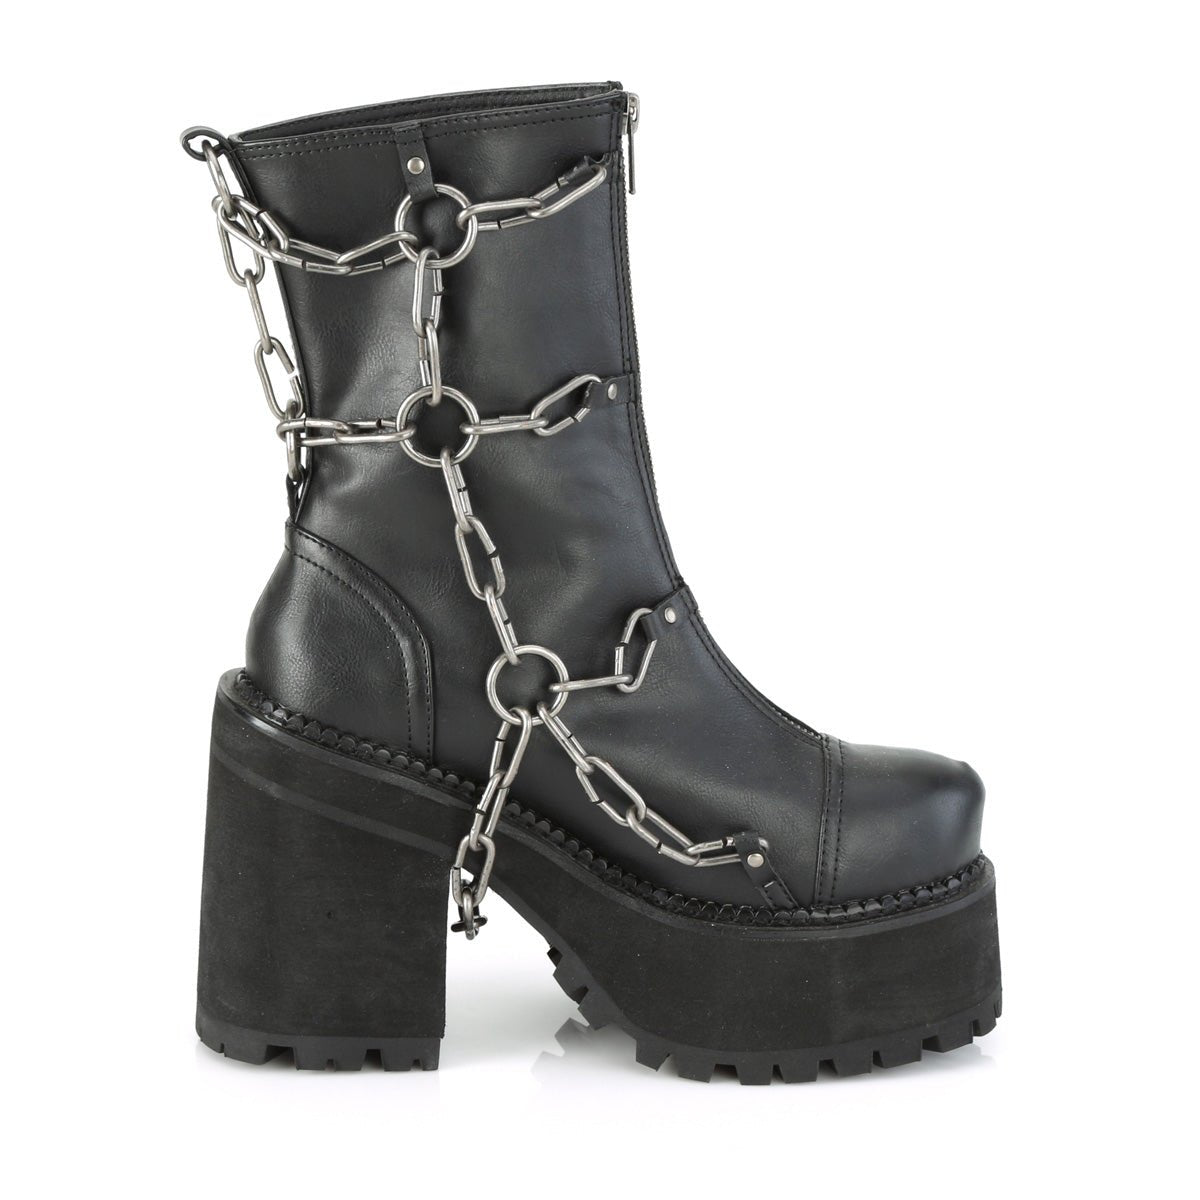 Too Fast | Demonia Assault 66 | Black Vegan Leather Women's Ankle Boots